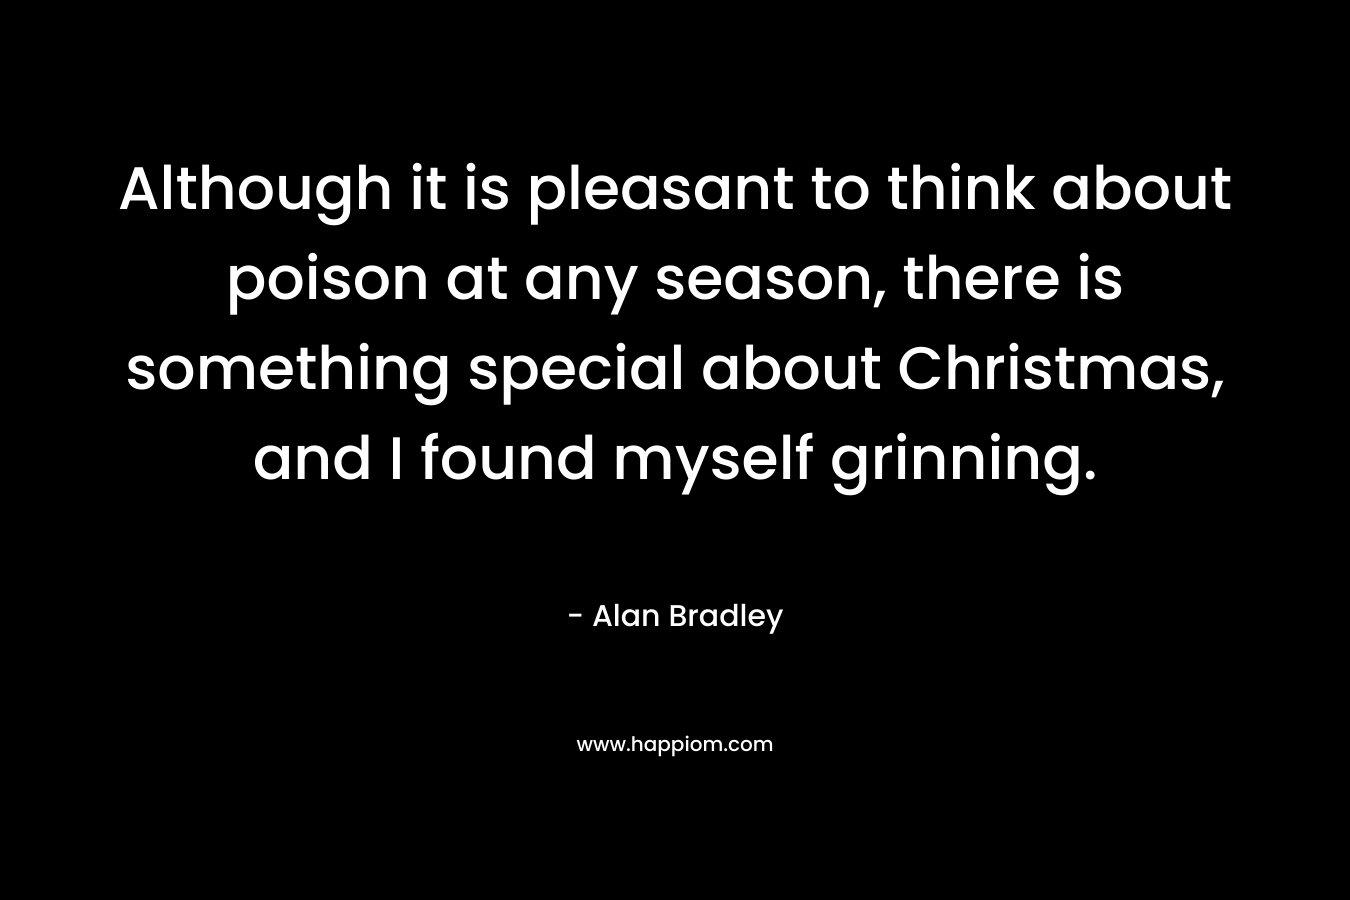 Although it is pleasant to think about poison at any season, there is something special about Christmas, and I found myself grinning. – Alan Bradley